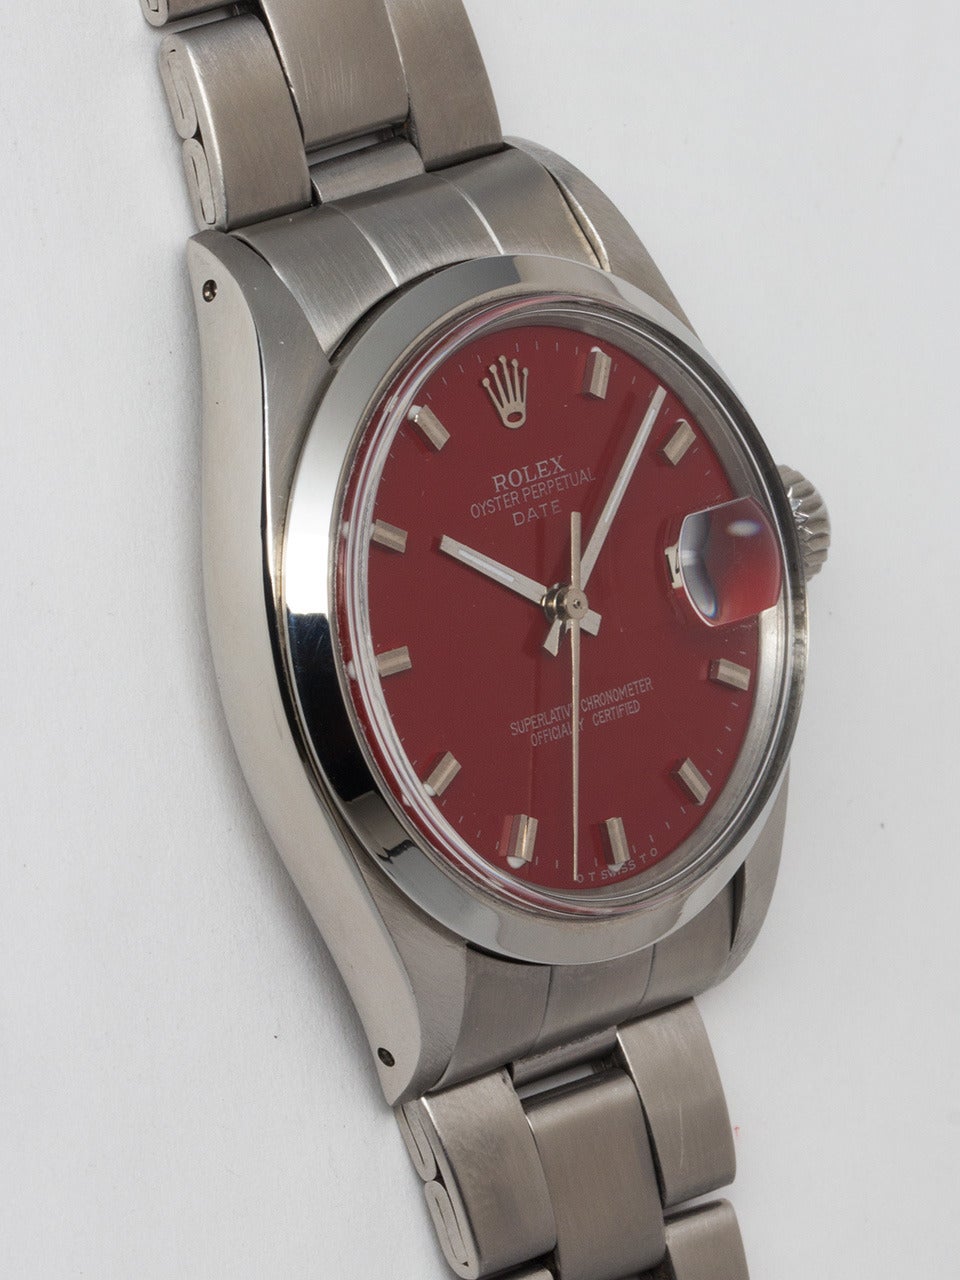 Rolex Stainless Steel Oyster Perpetual Date Wristwatch ref 1500 serial #2.7 million circa 1971. 34mm diameter case with smooth bezel and acrylic crystal. Gorgeous custom colored Vampire Red dial with applied silver indexes and silver baton hands.